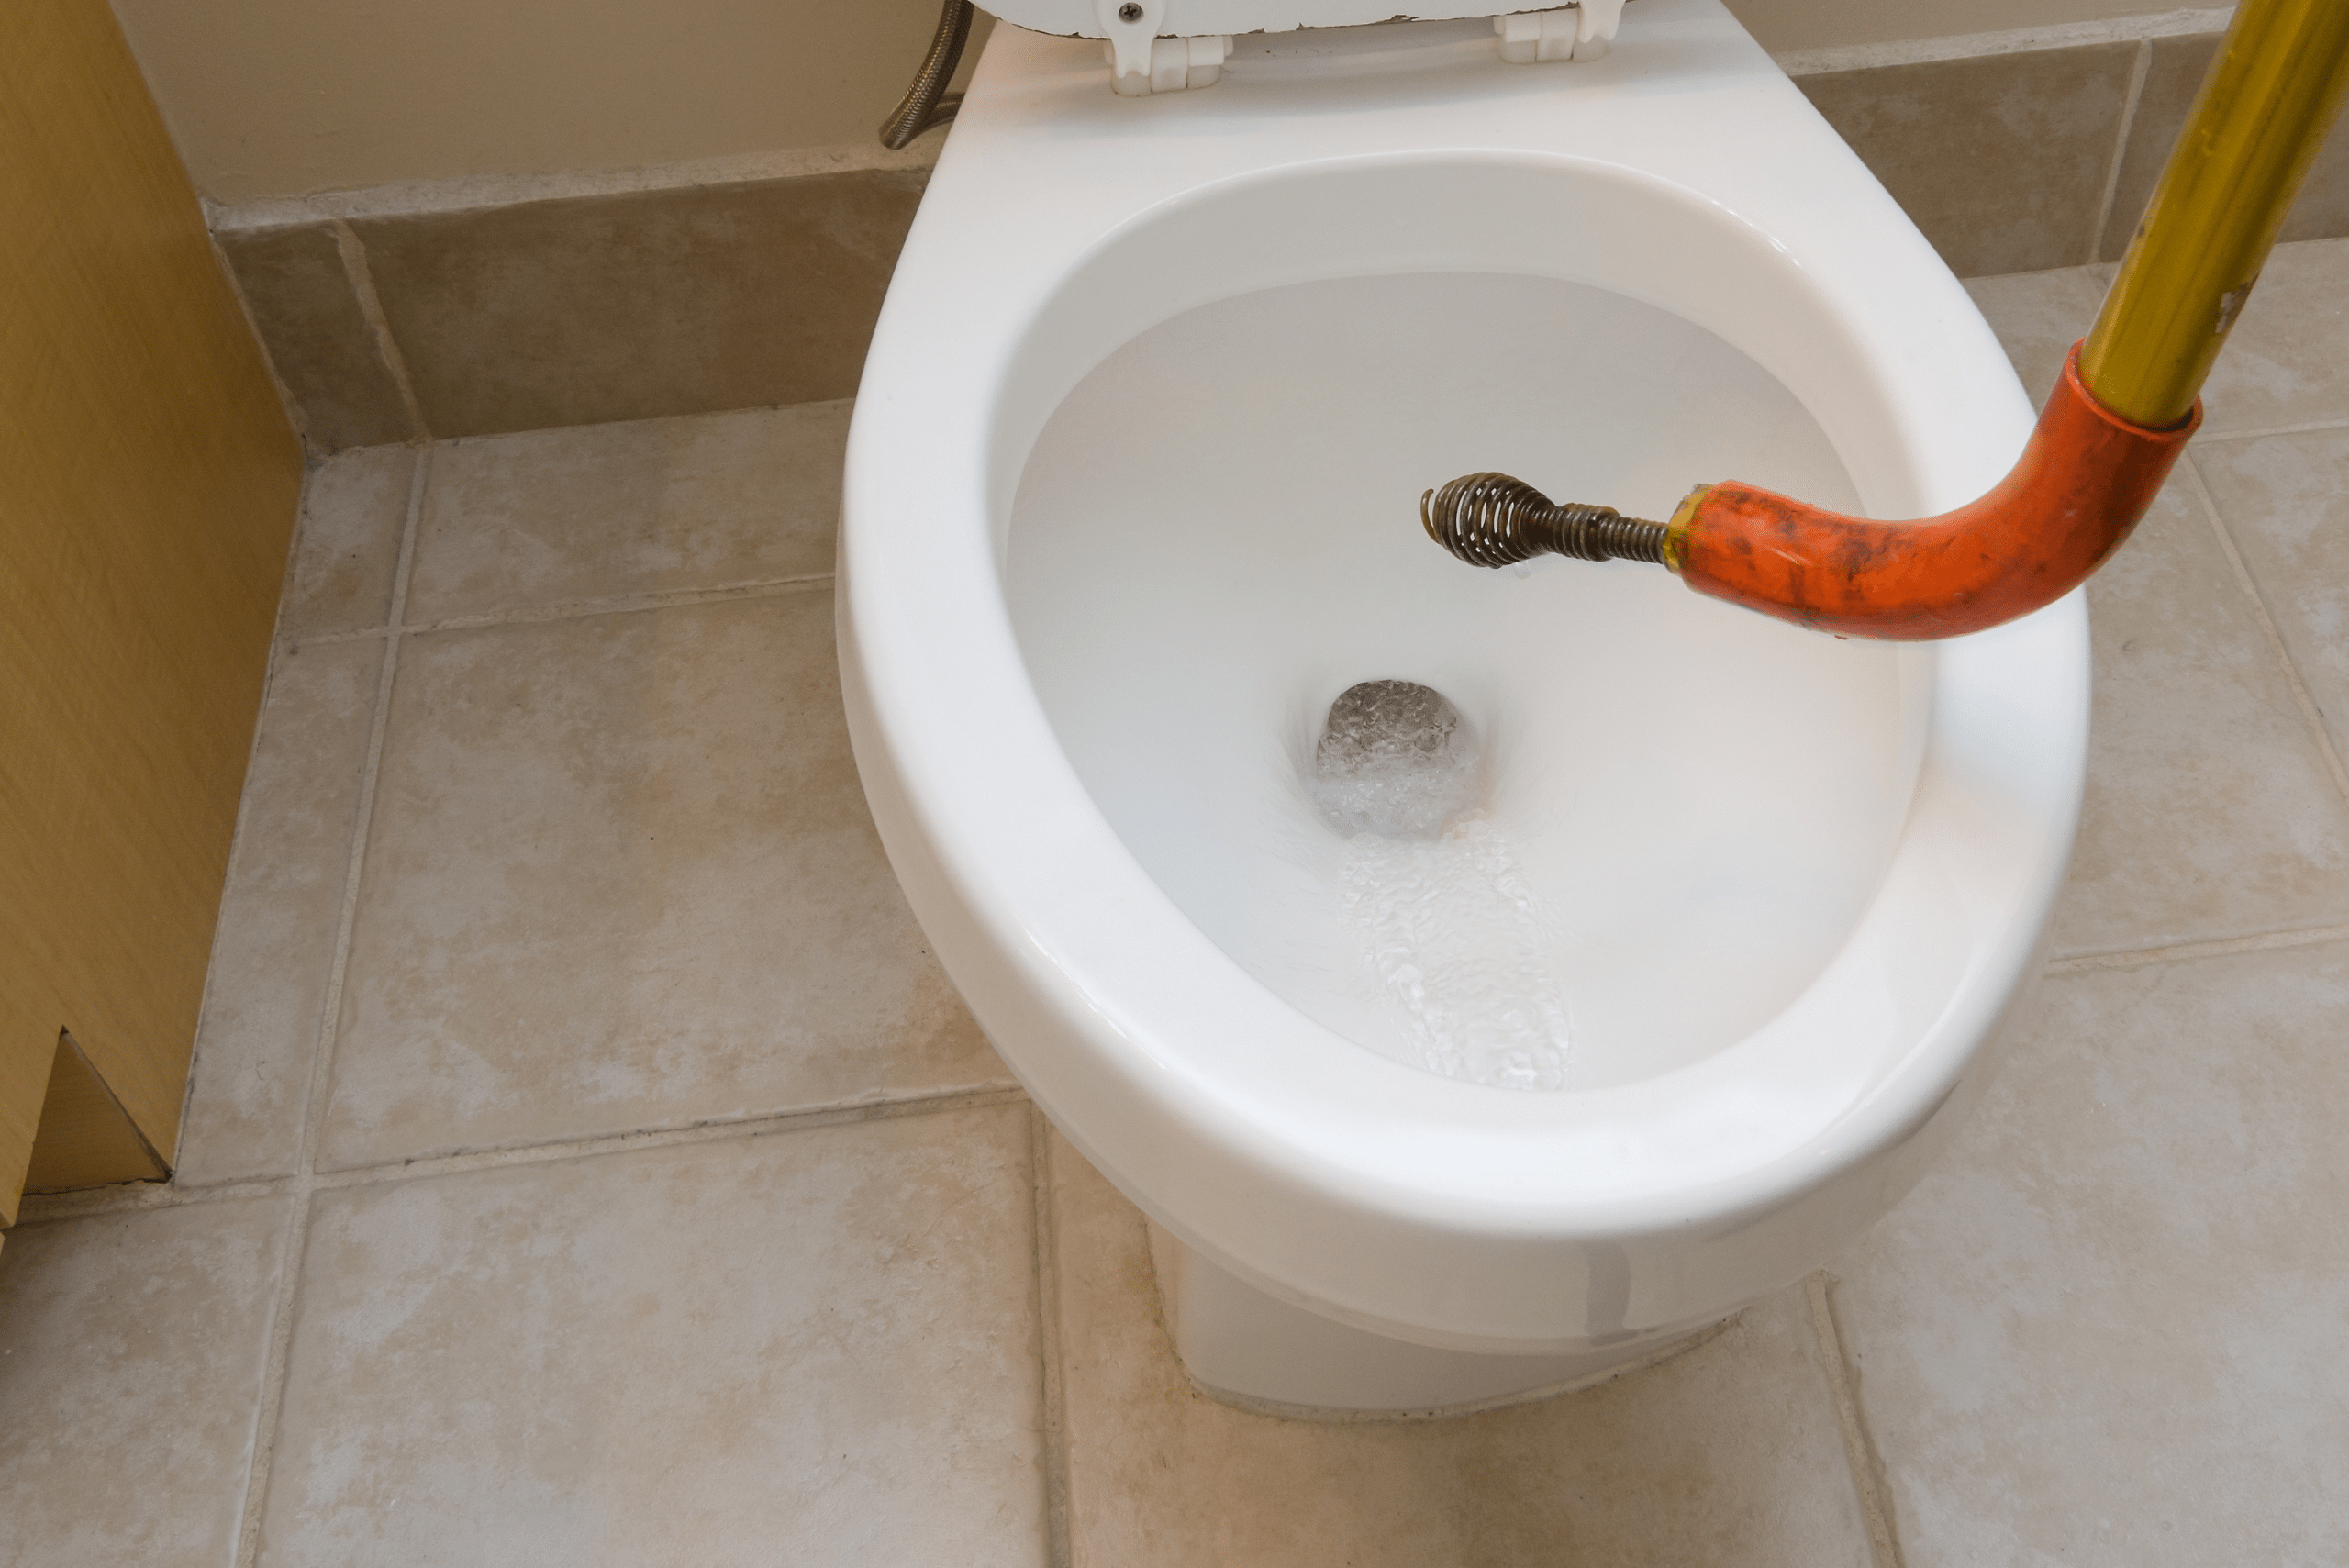 How to Snake a Toilet – Step-by-Step Drain Clearing Guide